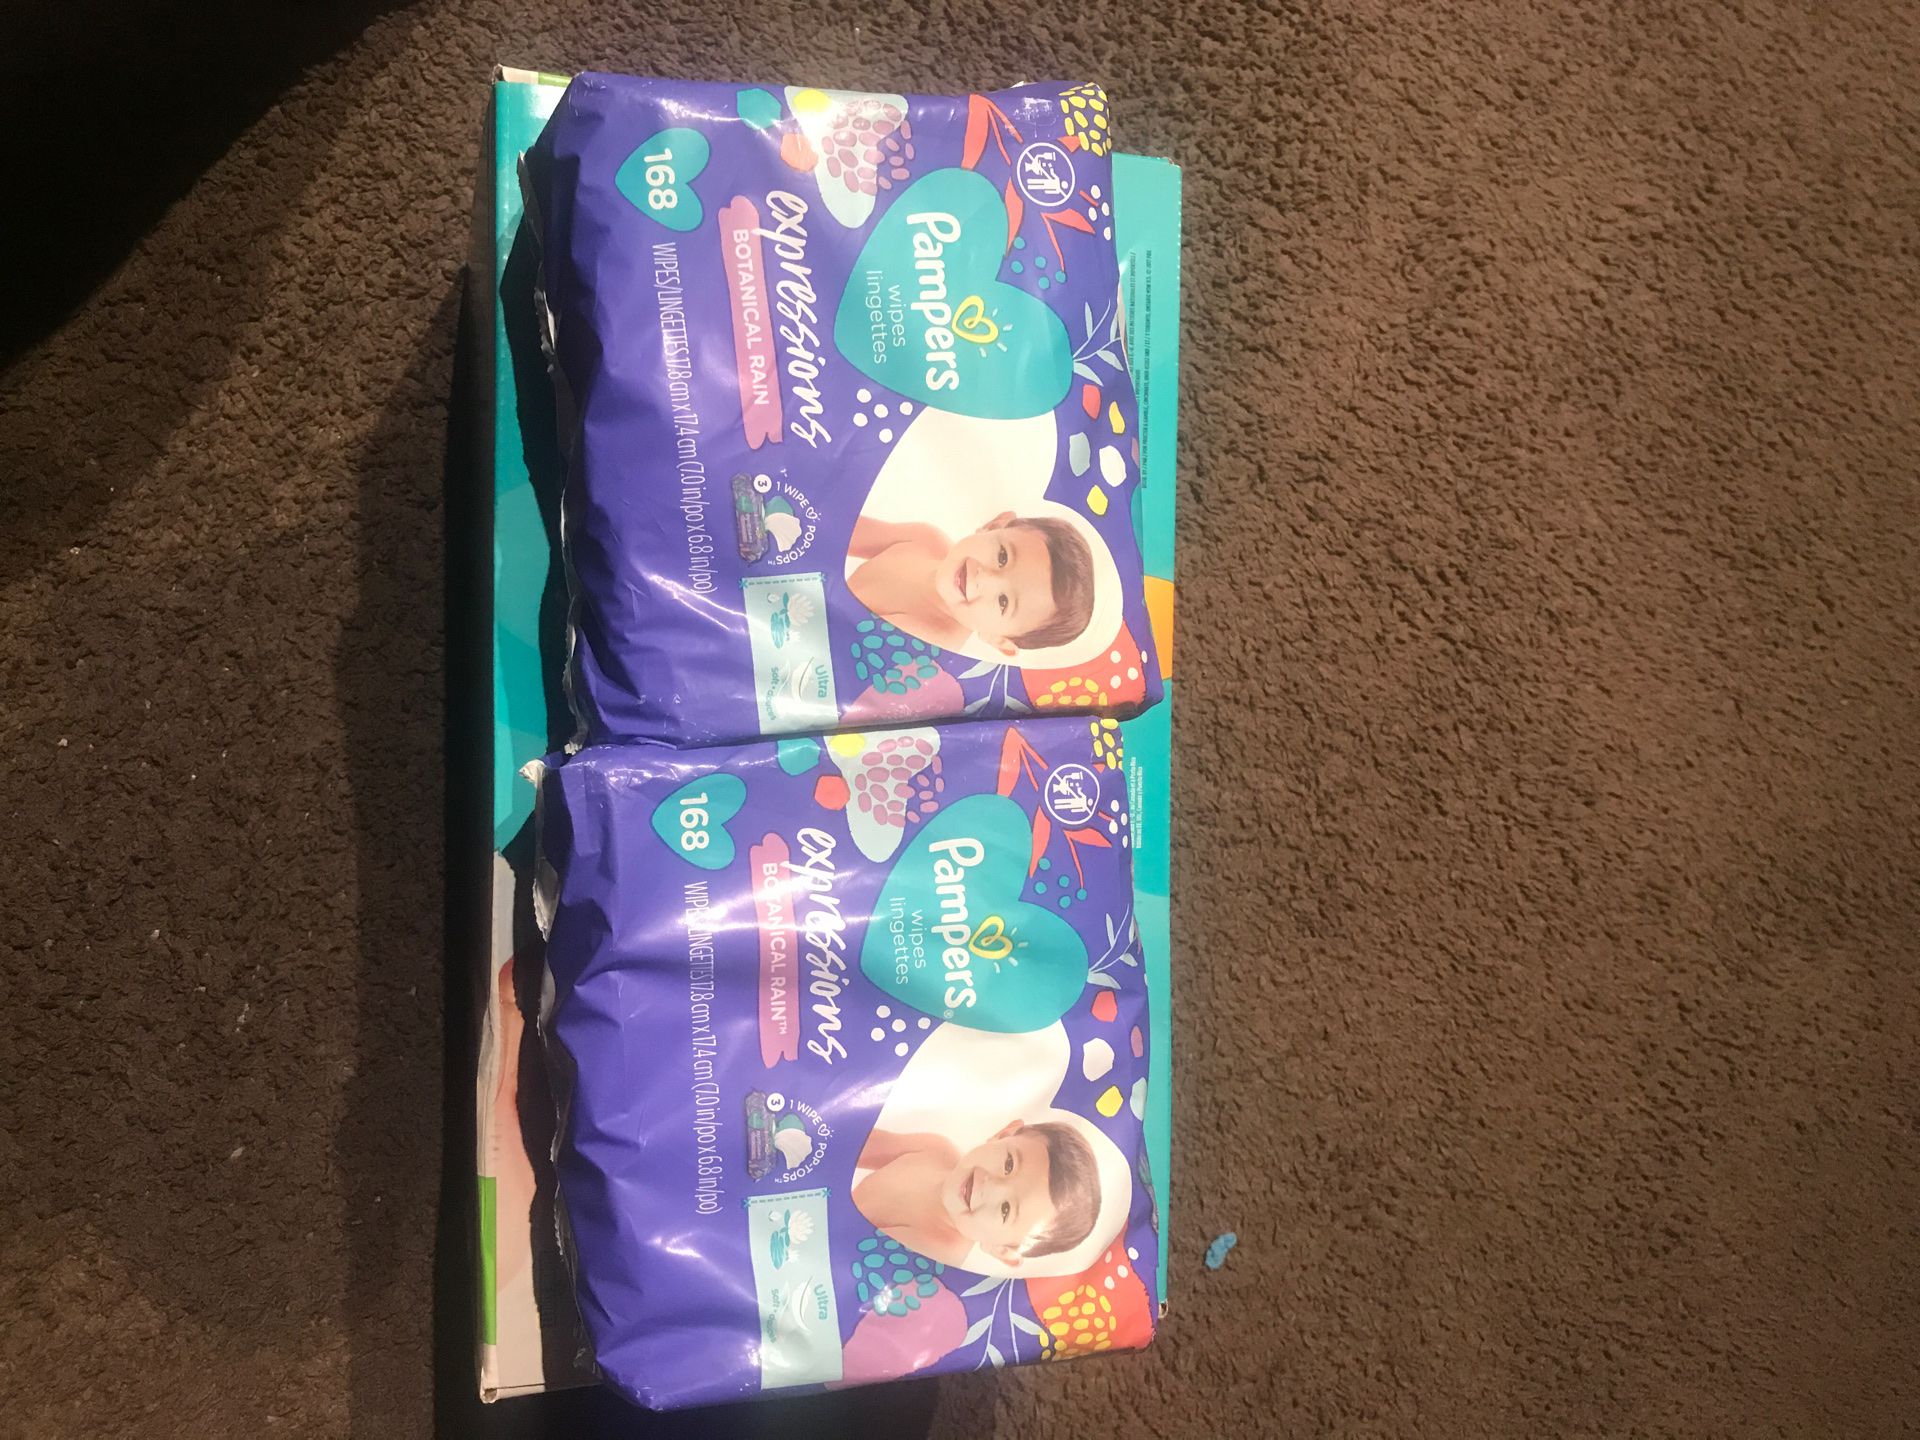 Pampers expression botanical rain wipes